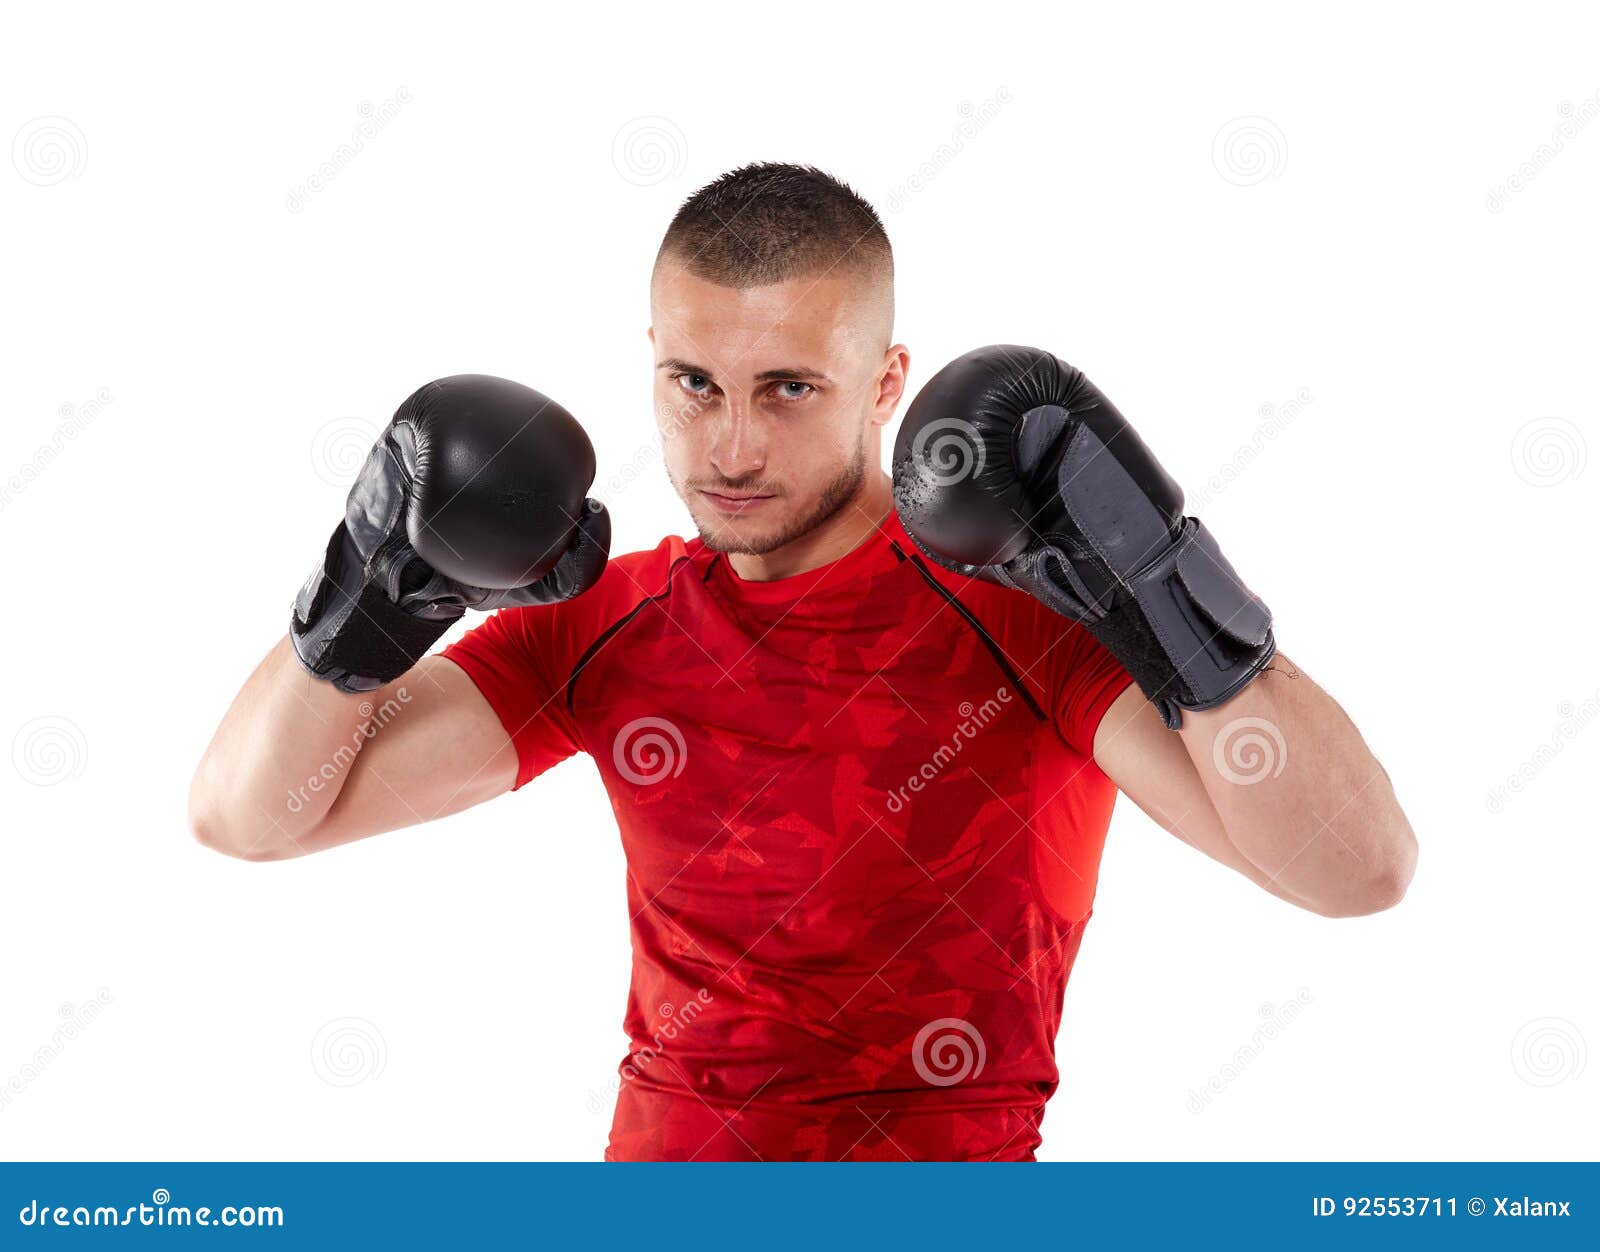 Young Kickbox Fighter on White Stock Image - Image of caucasian, combat ...